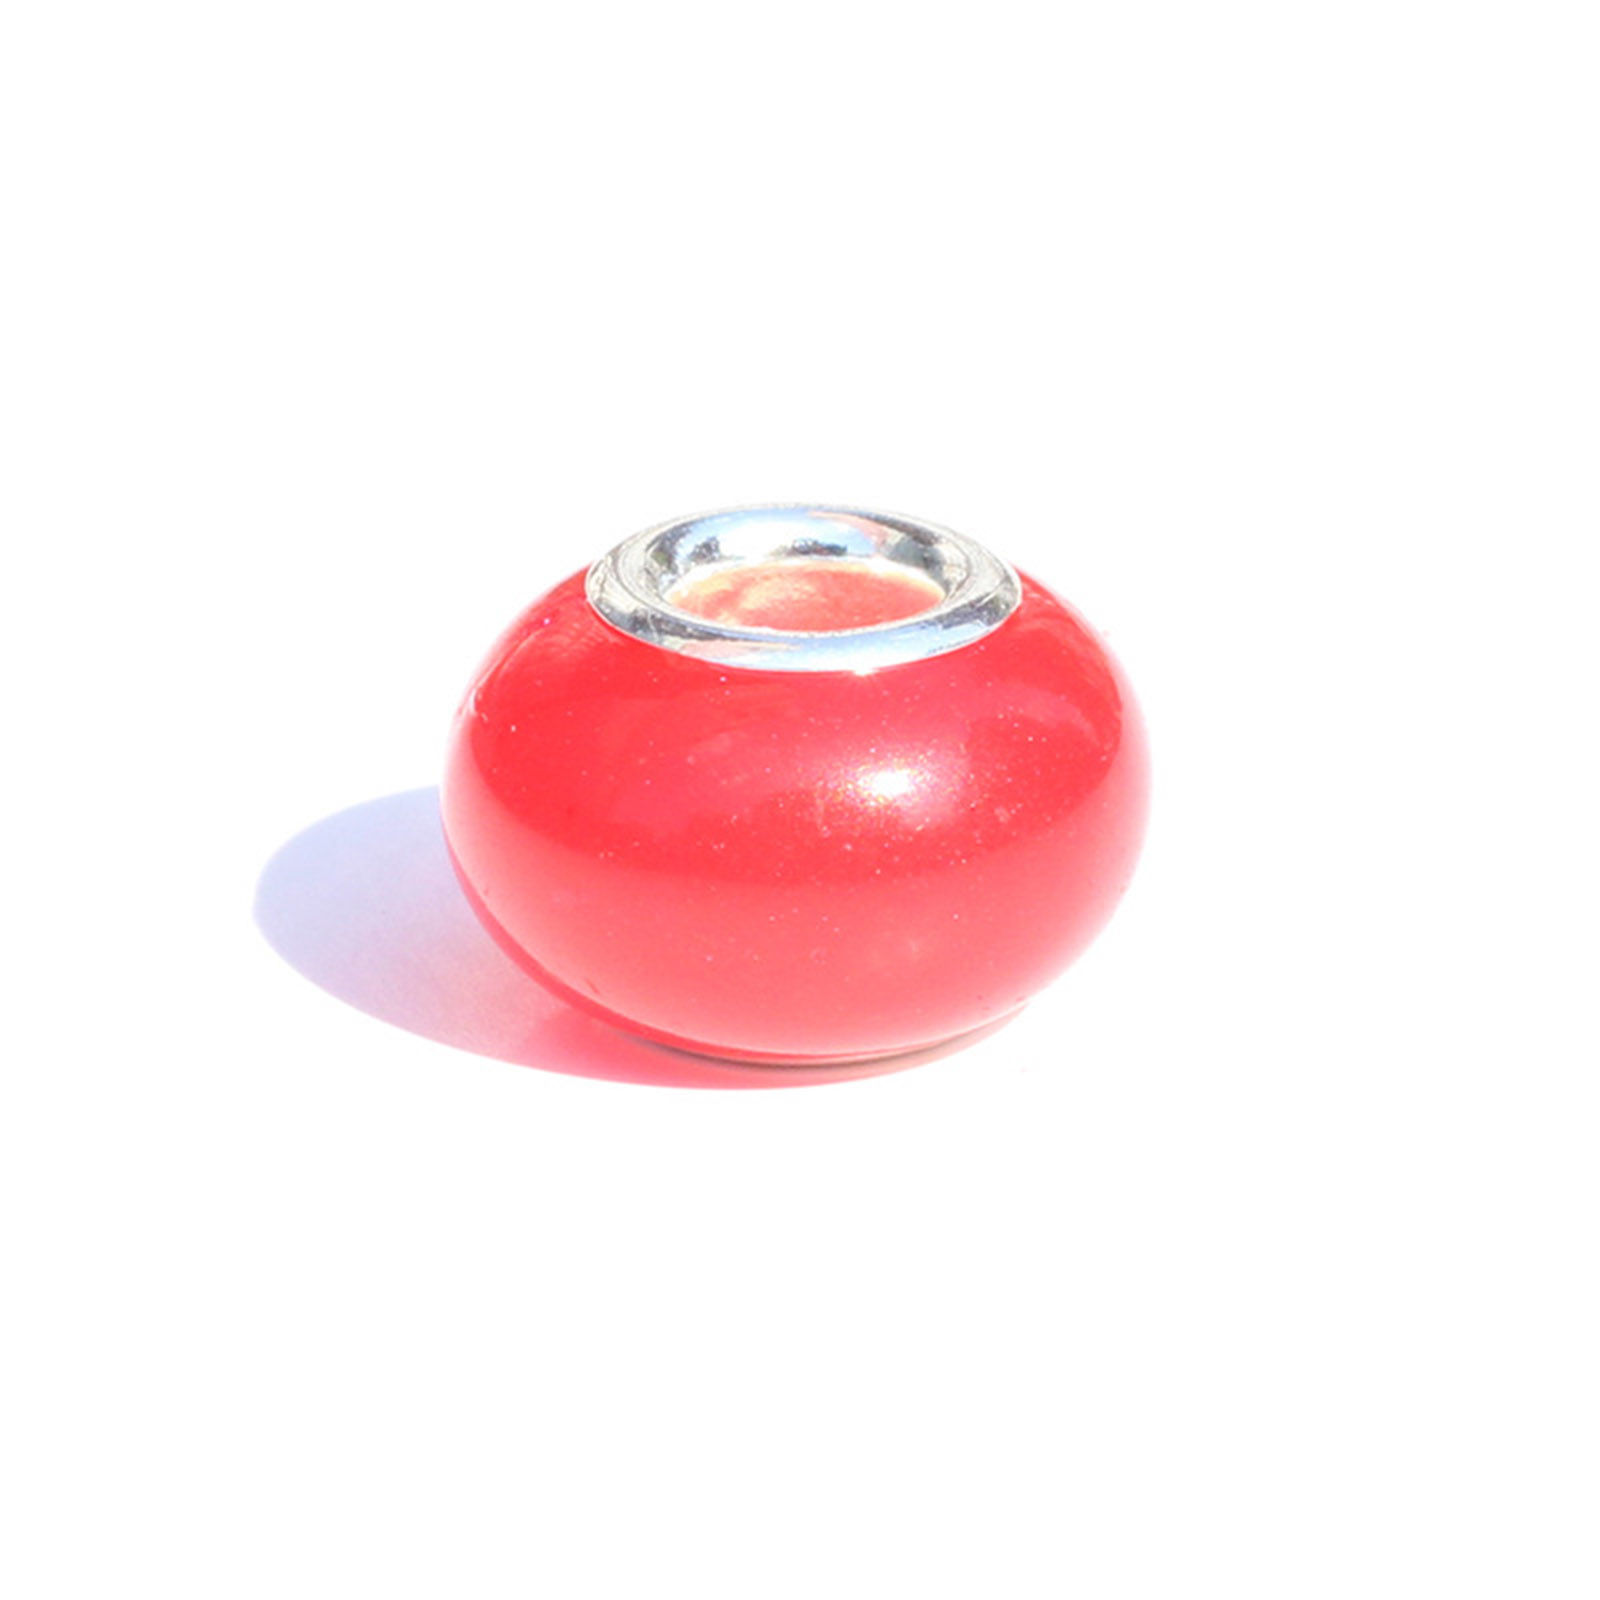 Picture of Resin European Style Large Hole Charm Beads Red Round Glow In The Dark Luminous 14mm x 9mm, Hole: Approx 5mm, 20 PCs